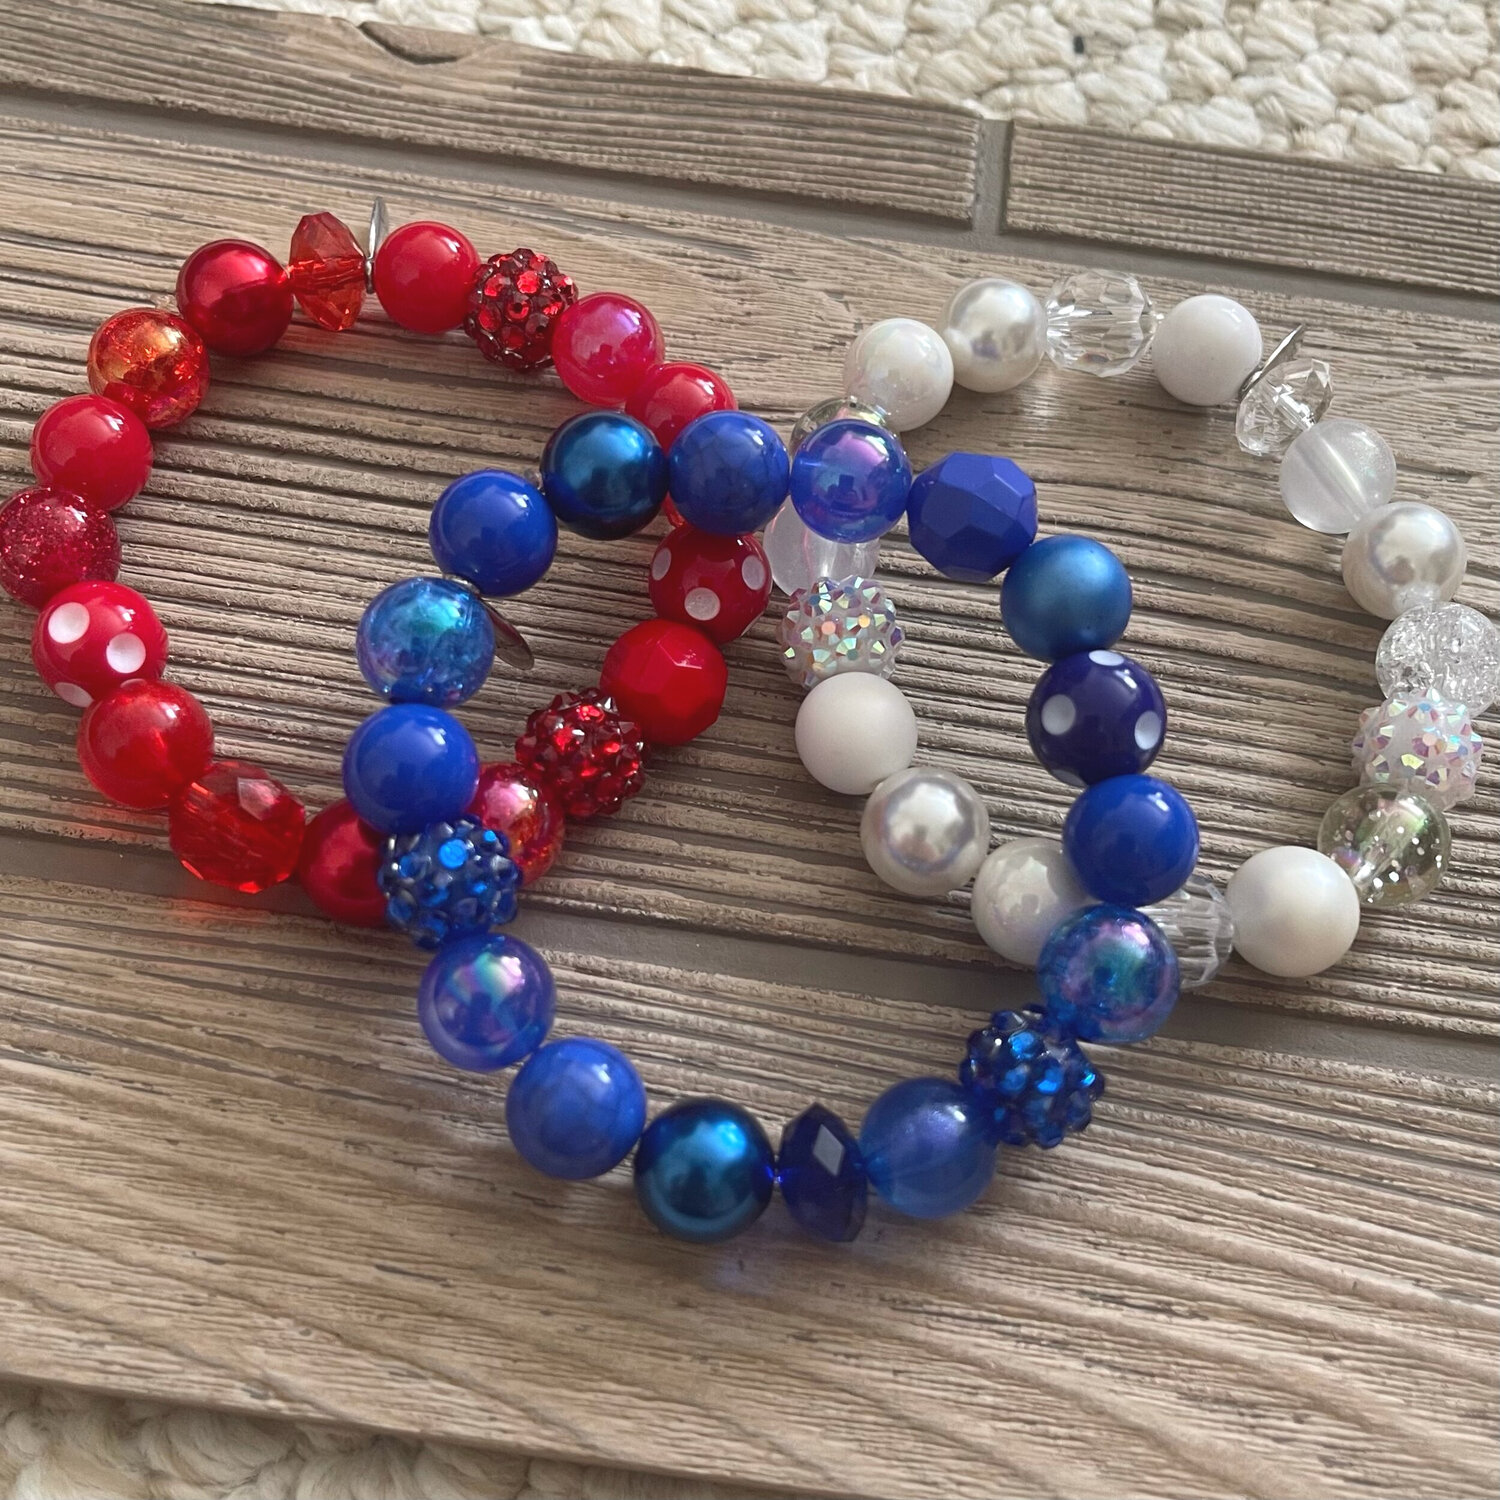 RED, WHITE AND BLUEWE LOVE YOU Mixed Bead Style Beaded Bracelet. —